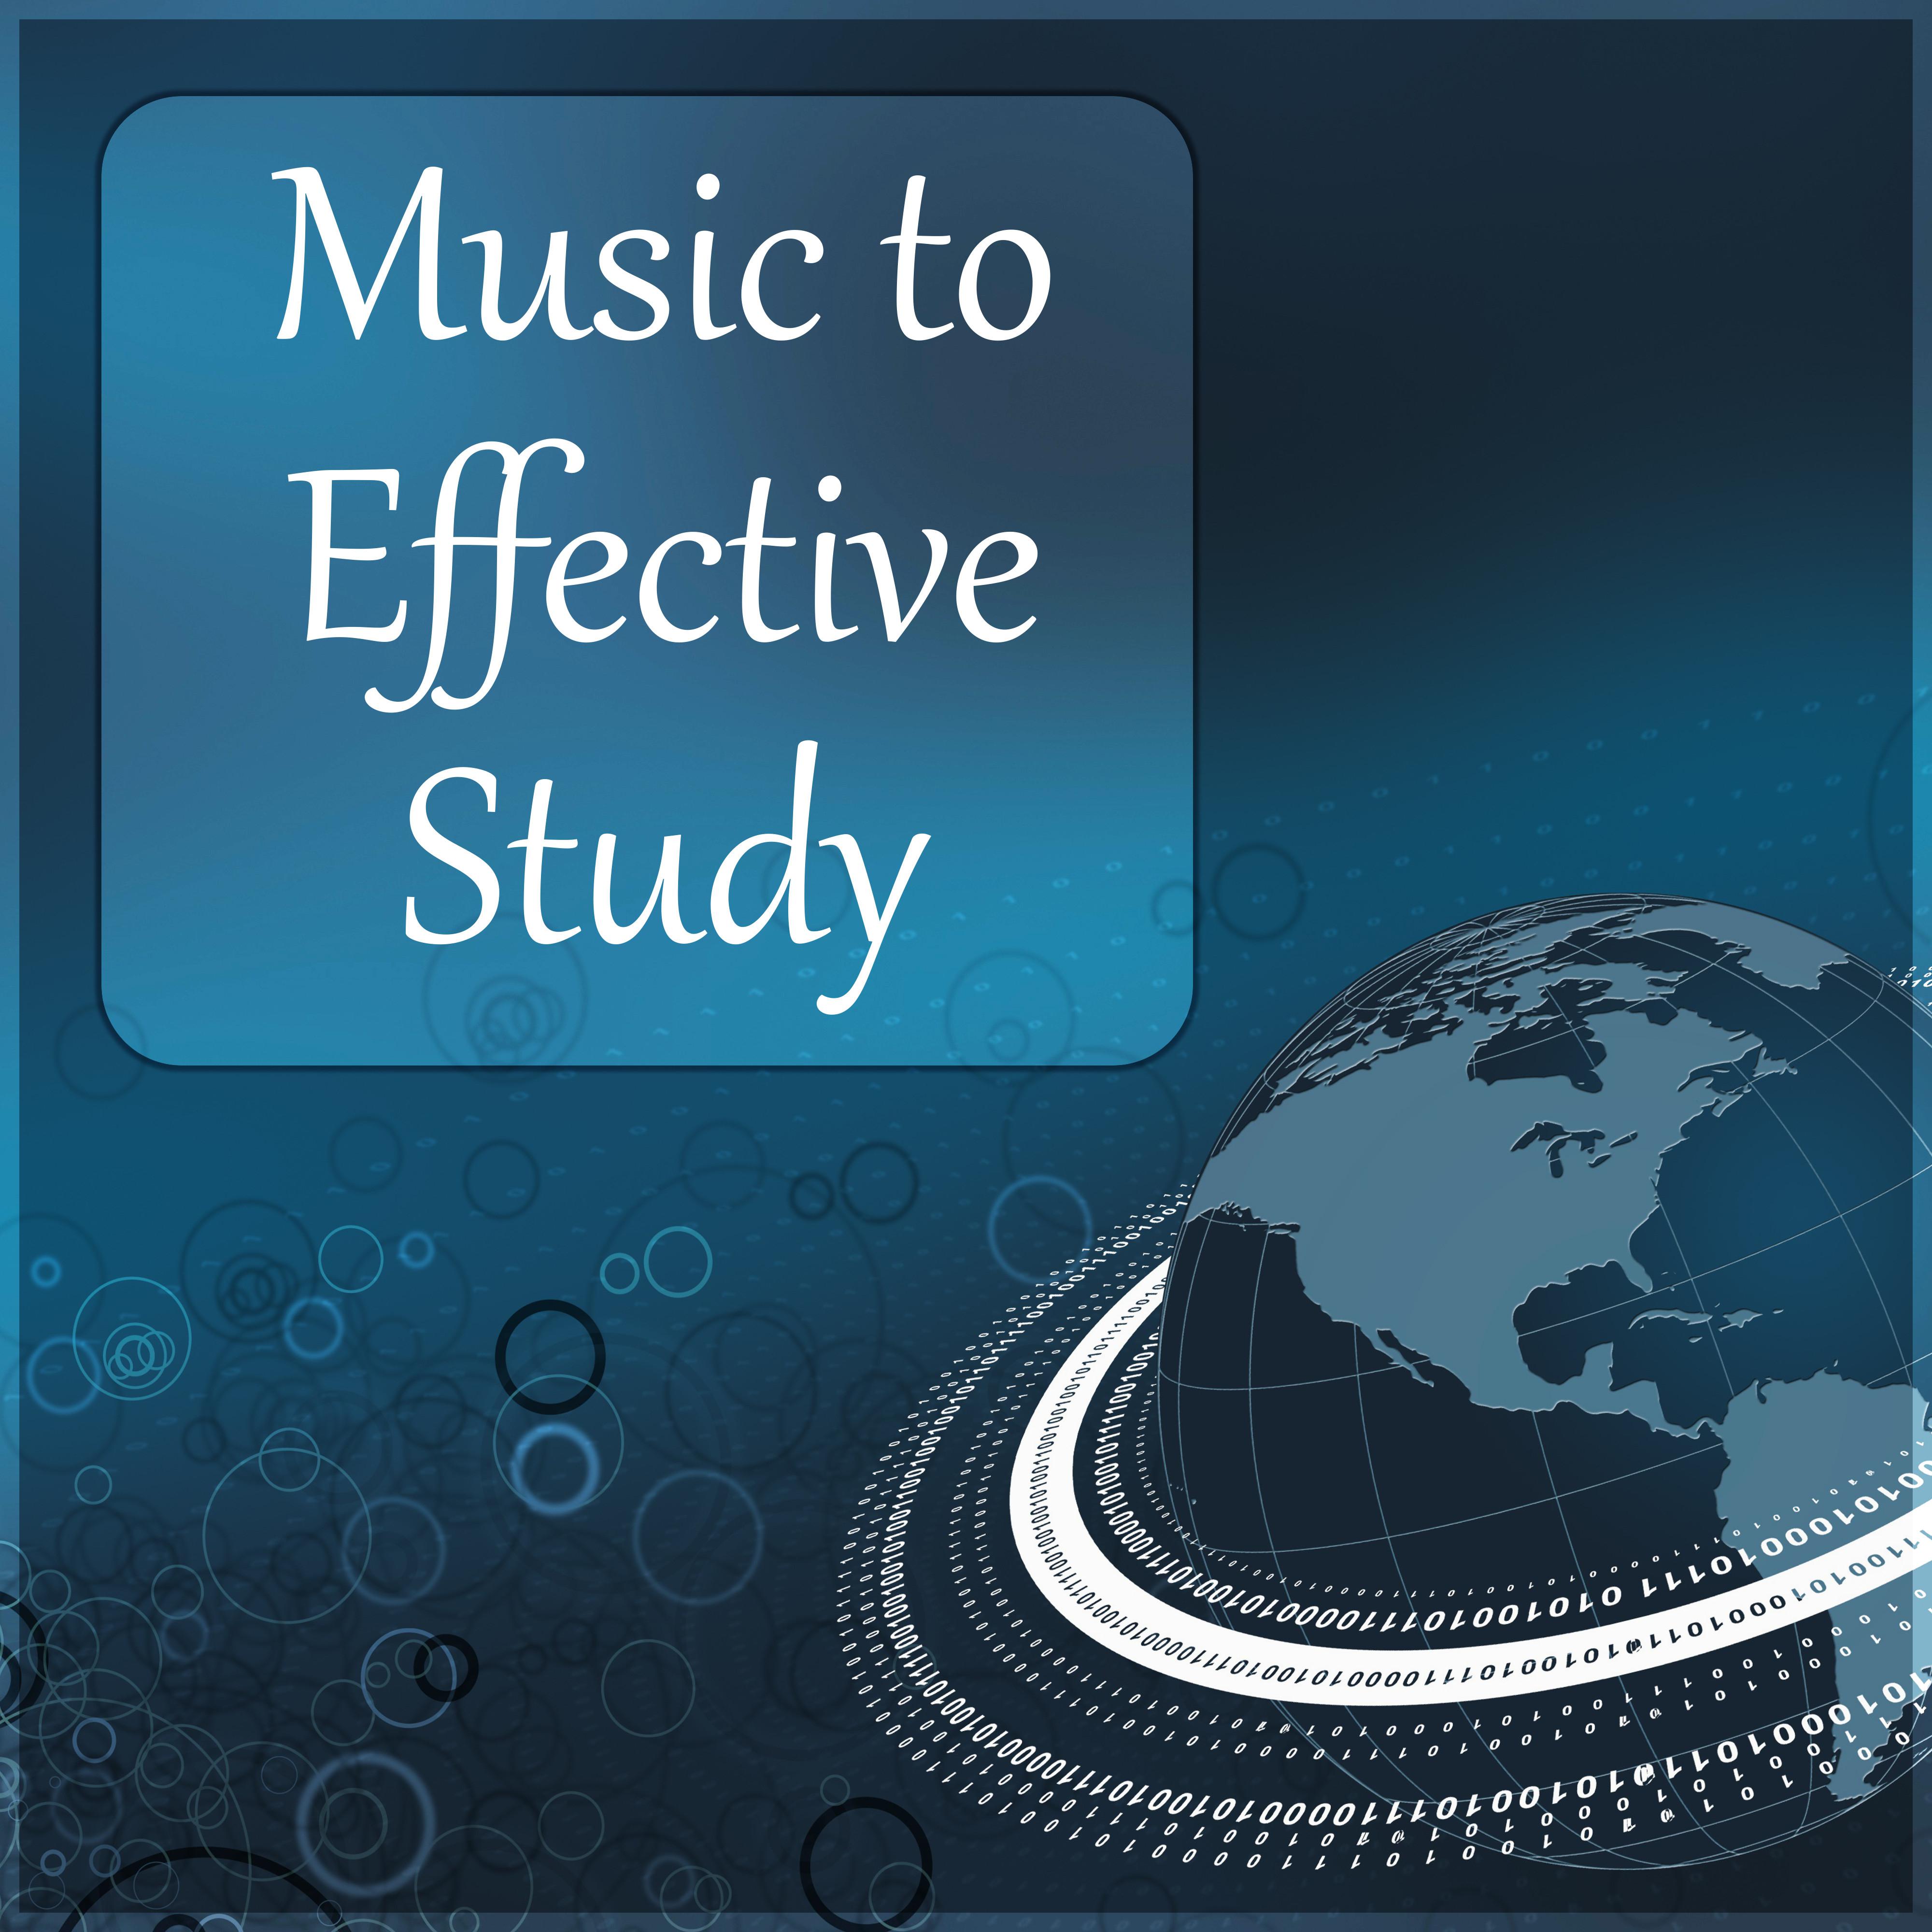 Music to Effective Study  New Age, Cal Music for Concentration, Deep Sounds for Learn, Relaxation and Meditation Sounds of Nature